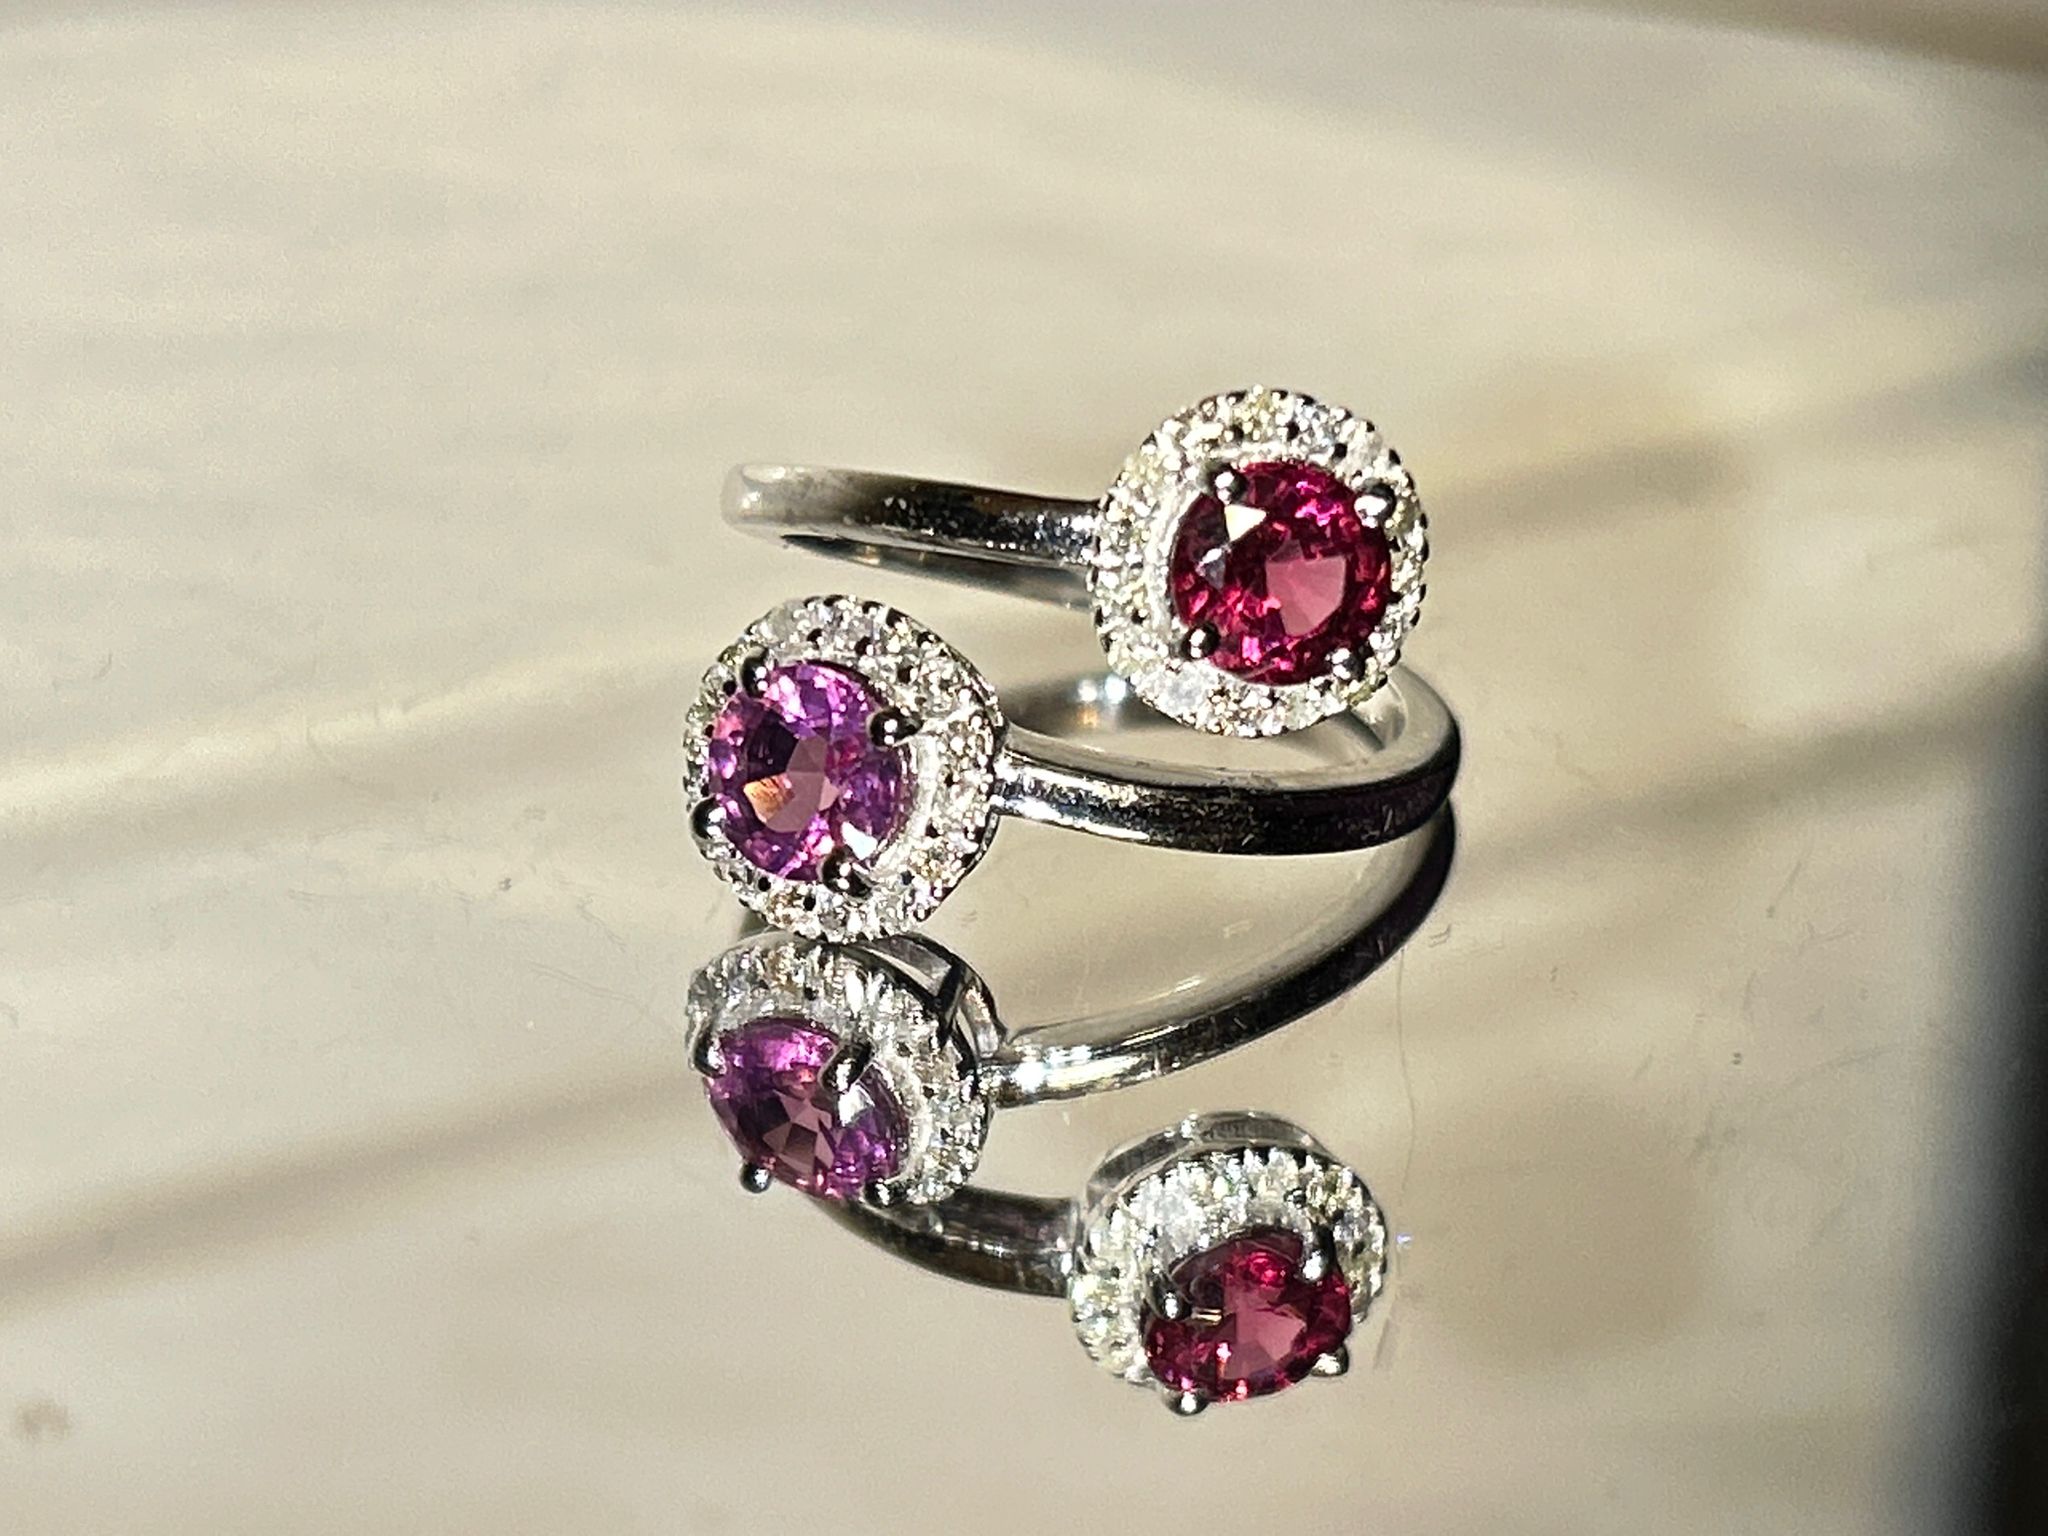 Beautiful Natural Spinel Ring With Diamonds and 18k Gold - Image 2 of 8